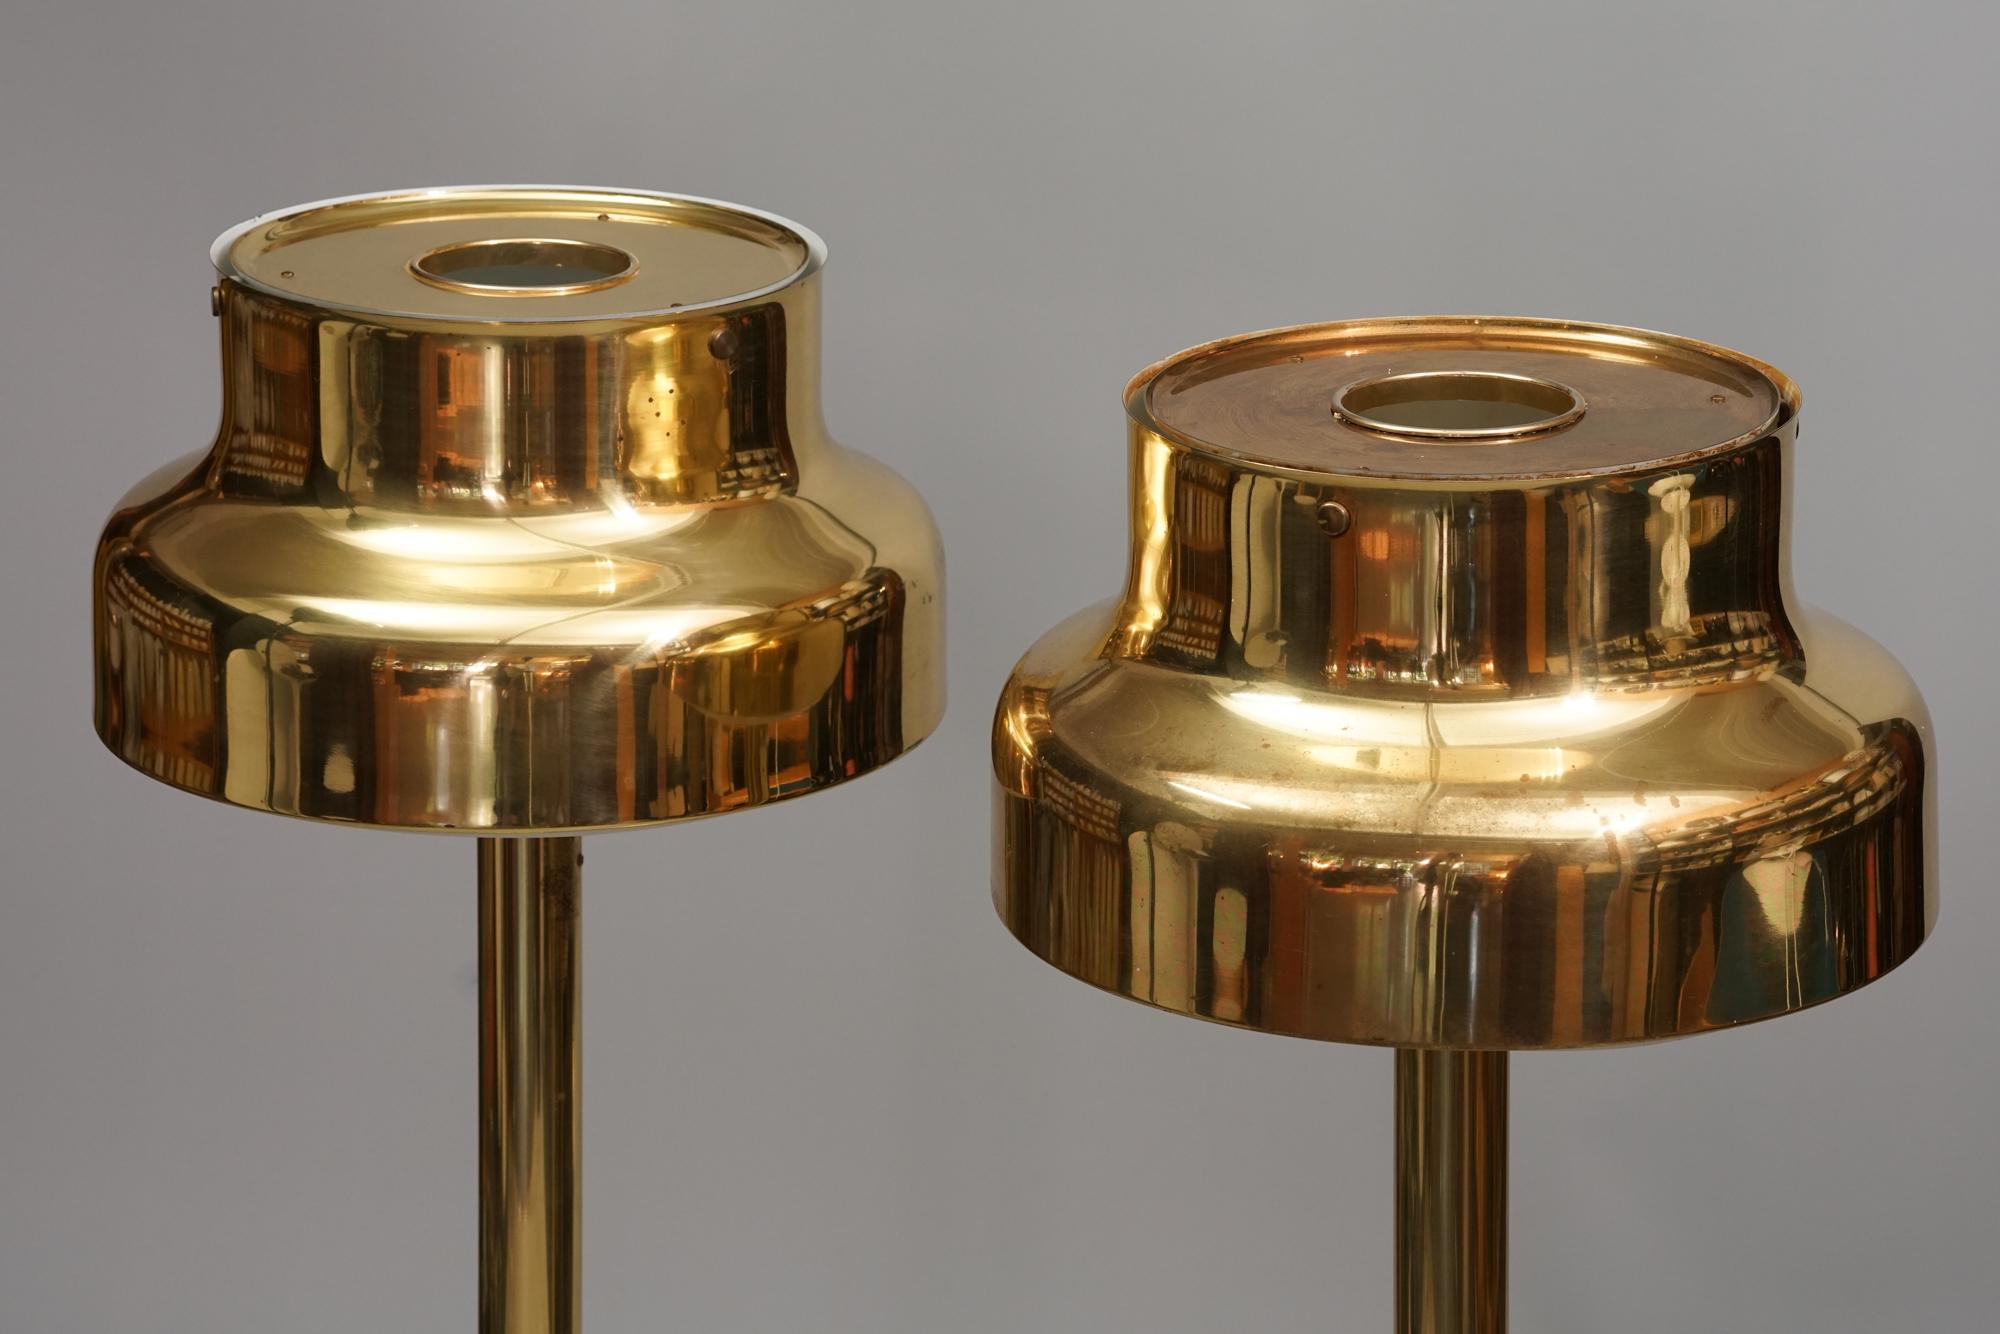 Set of two model Bumling floor lamps by Anders Pehrson for  Ateljé Lyktan from the 1950s/1960s. Brass and plastic. Good vintage condition, minor patina and wear consistent with age and use. Floor lamps are sold as a set. 